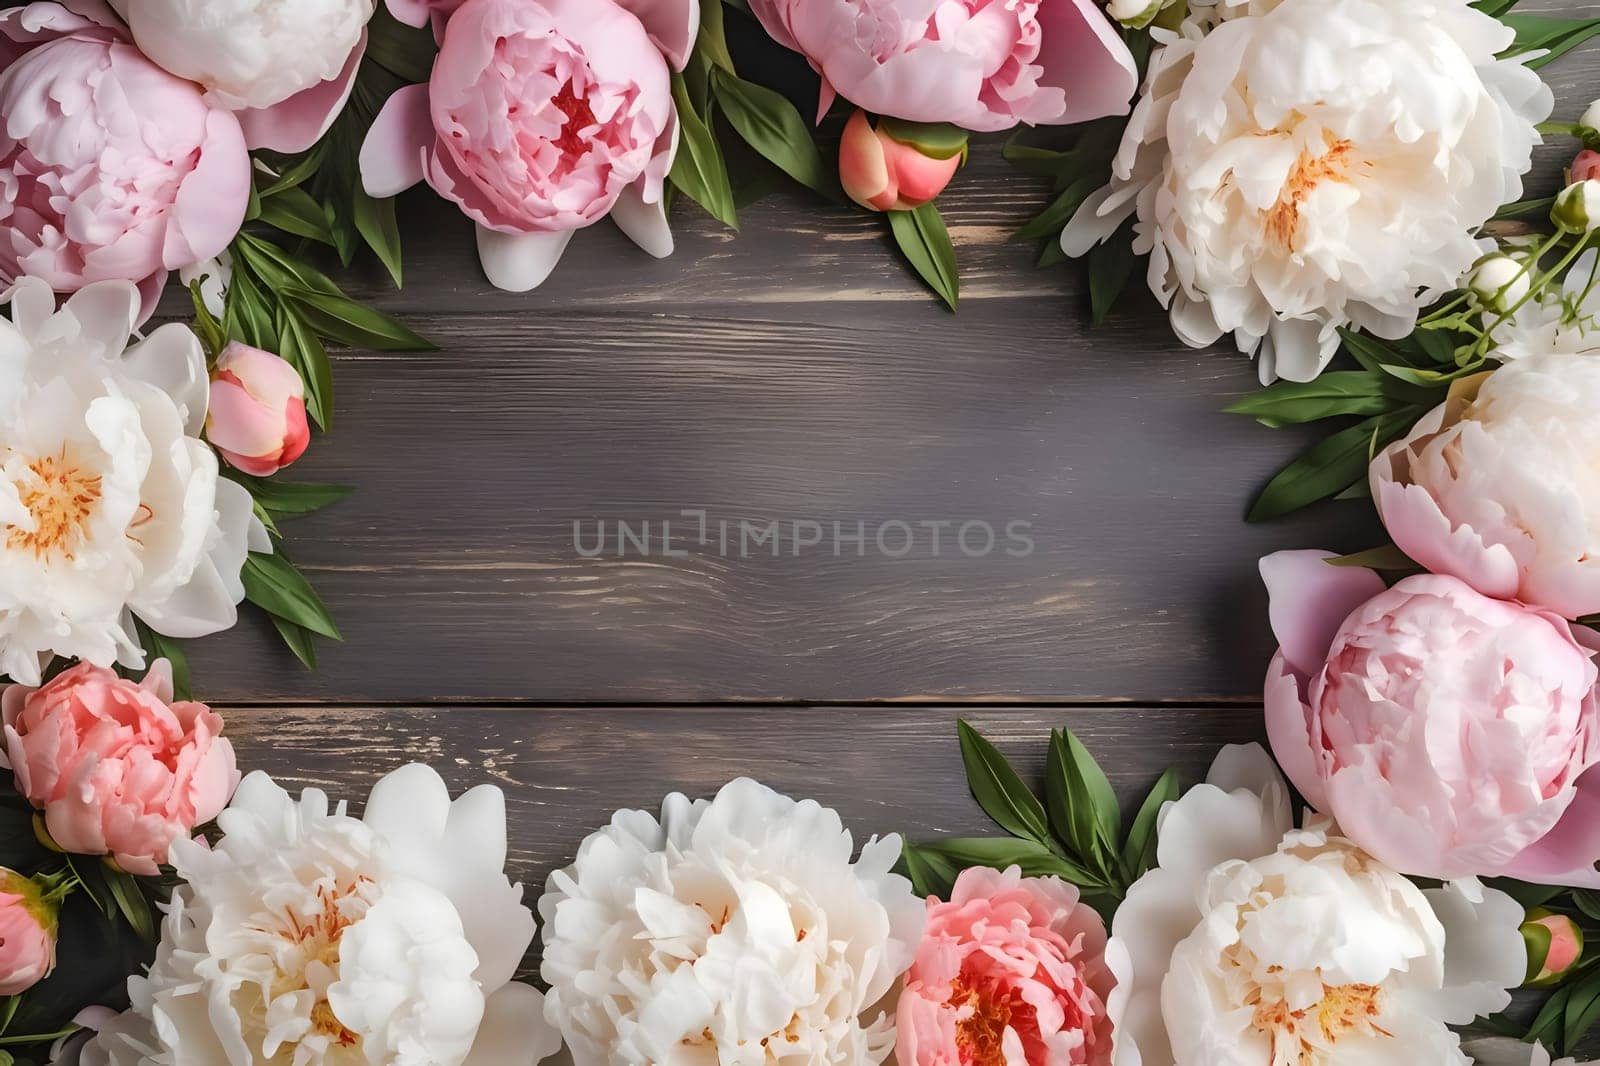 Elegant white and pink roses artfully placed on wood. Ample space for inscription or a banner, enhancing the graceful arrangement.